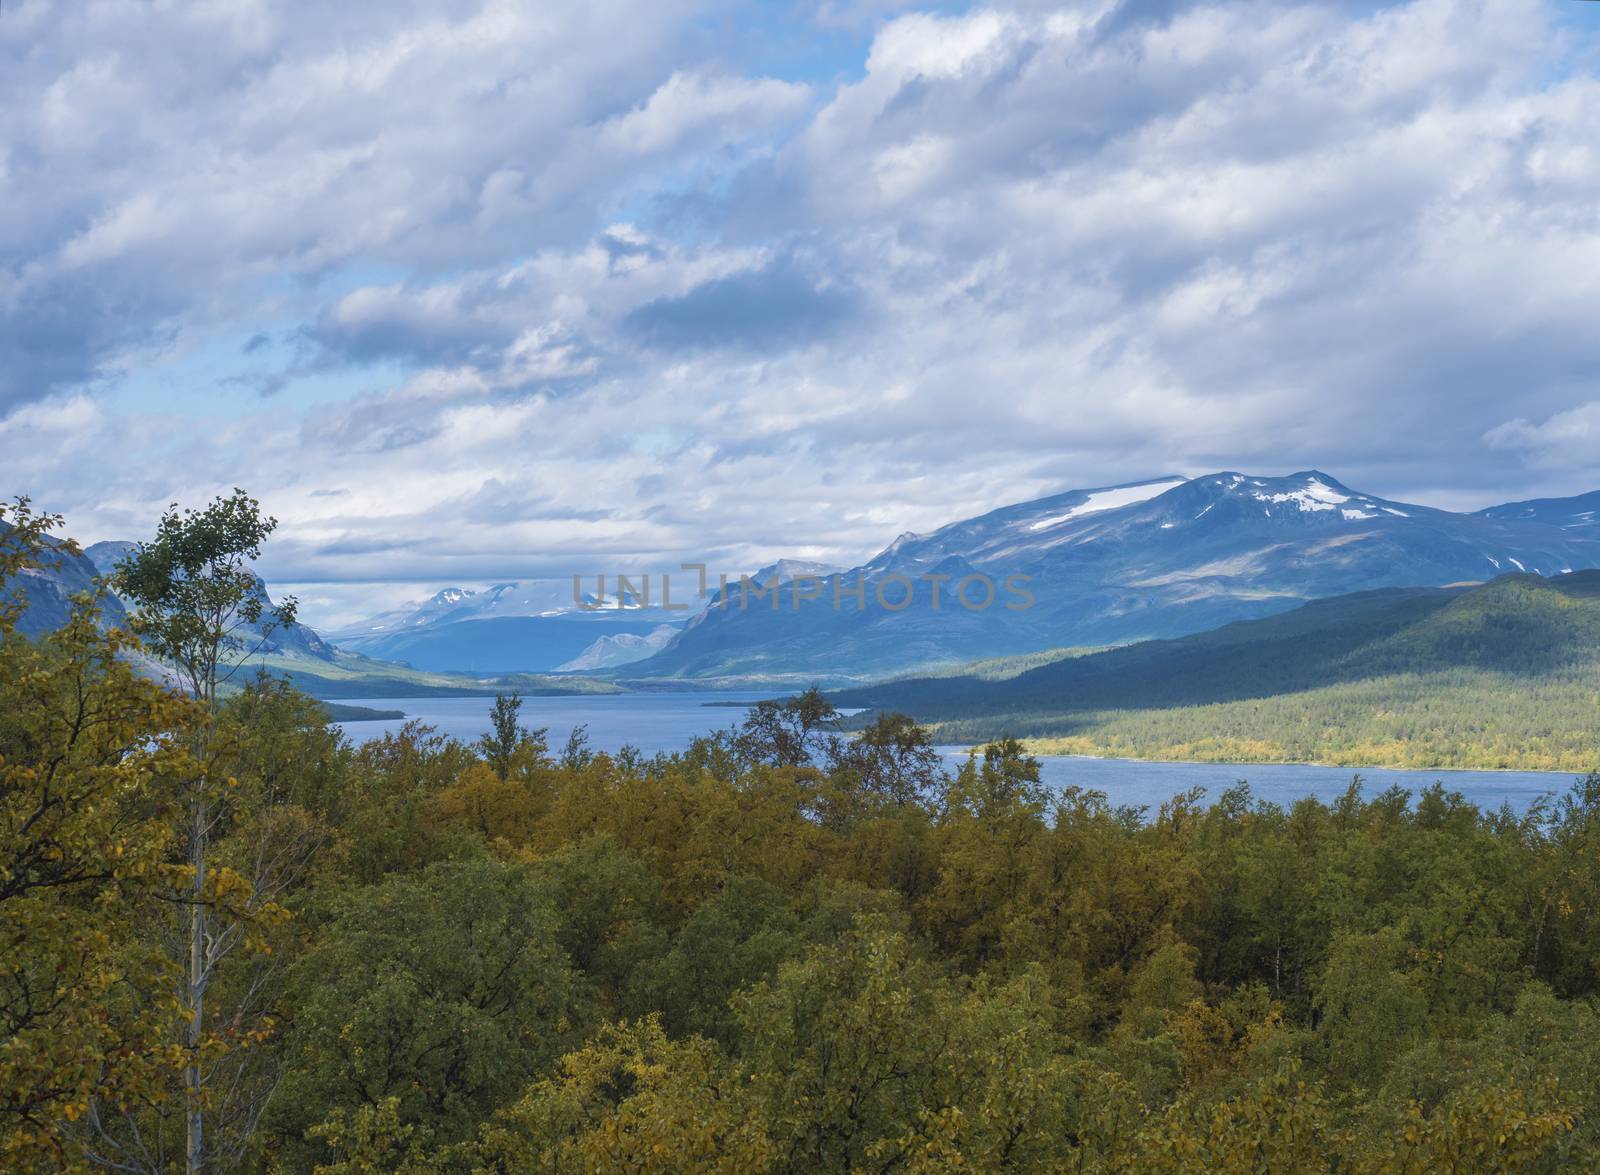 Lapland landscape with beautiful river Lulealven, snow capped mountain, birch tree and footpath of Kungsleden hiking trail near Saltoluokta, north of Sweden wild nature. Summer blue sky.